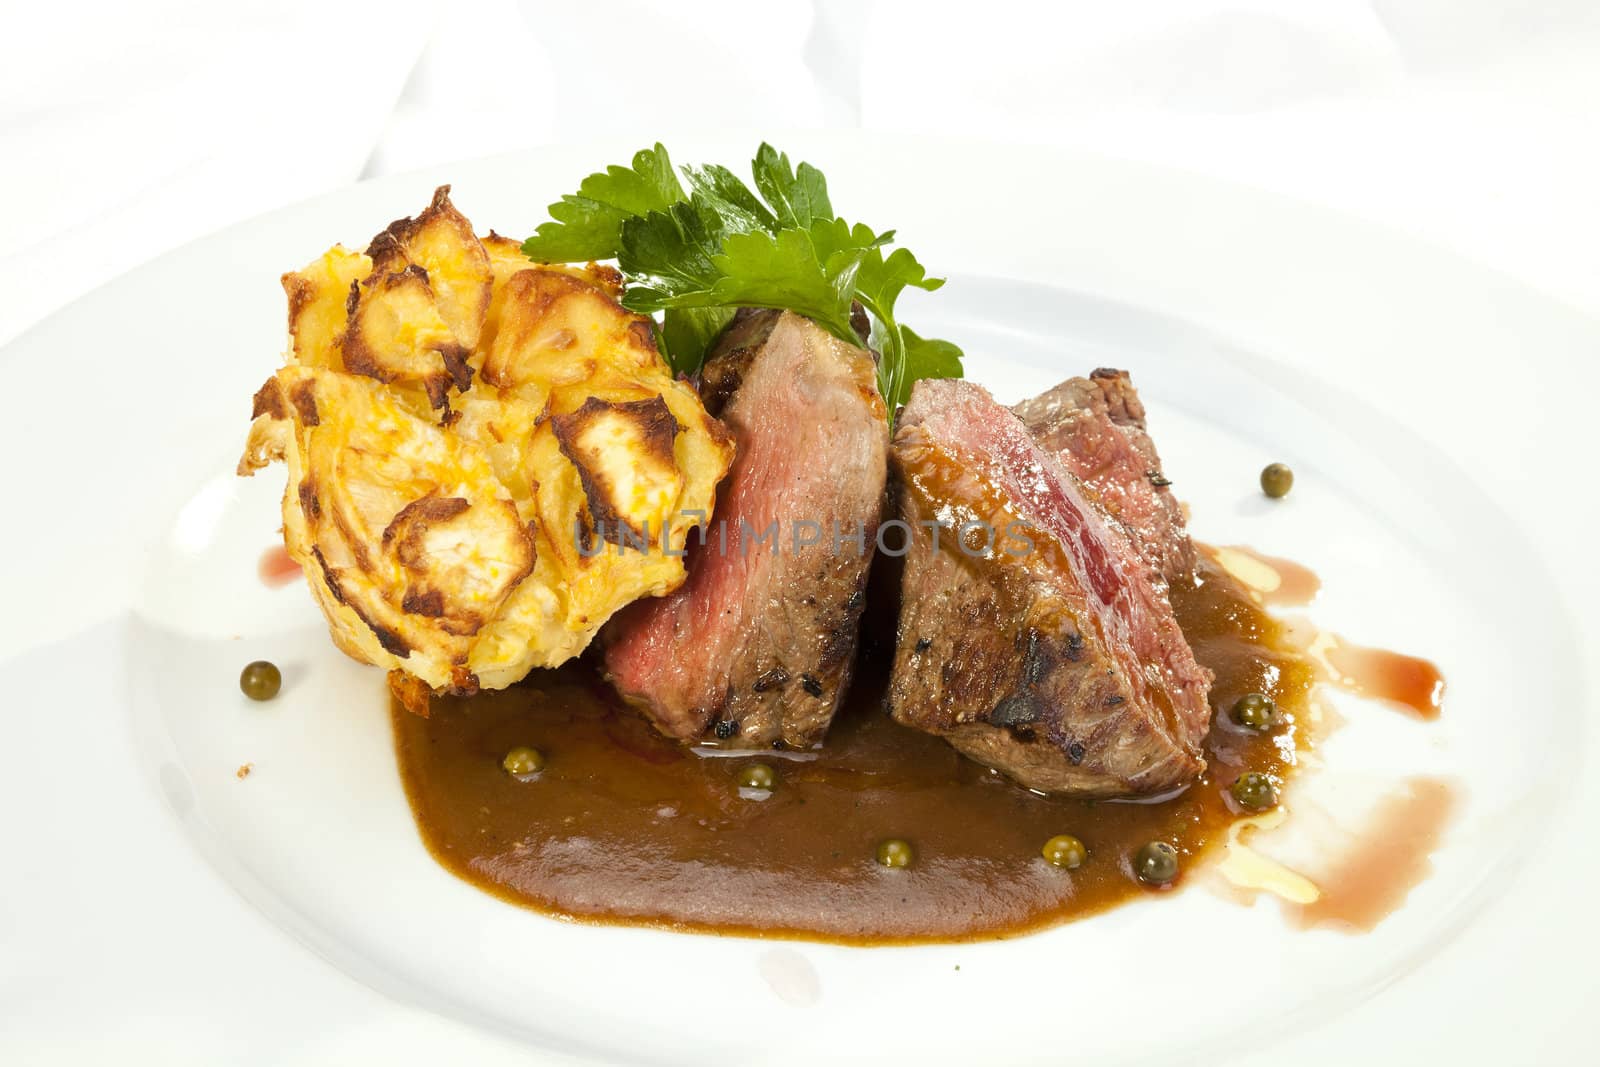 Grilled Sirloin with pepper sauce and grilled potatoes by hanusst